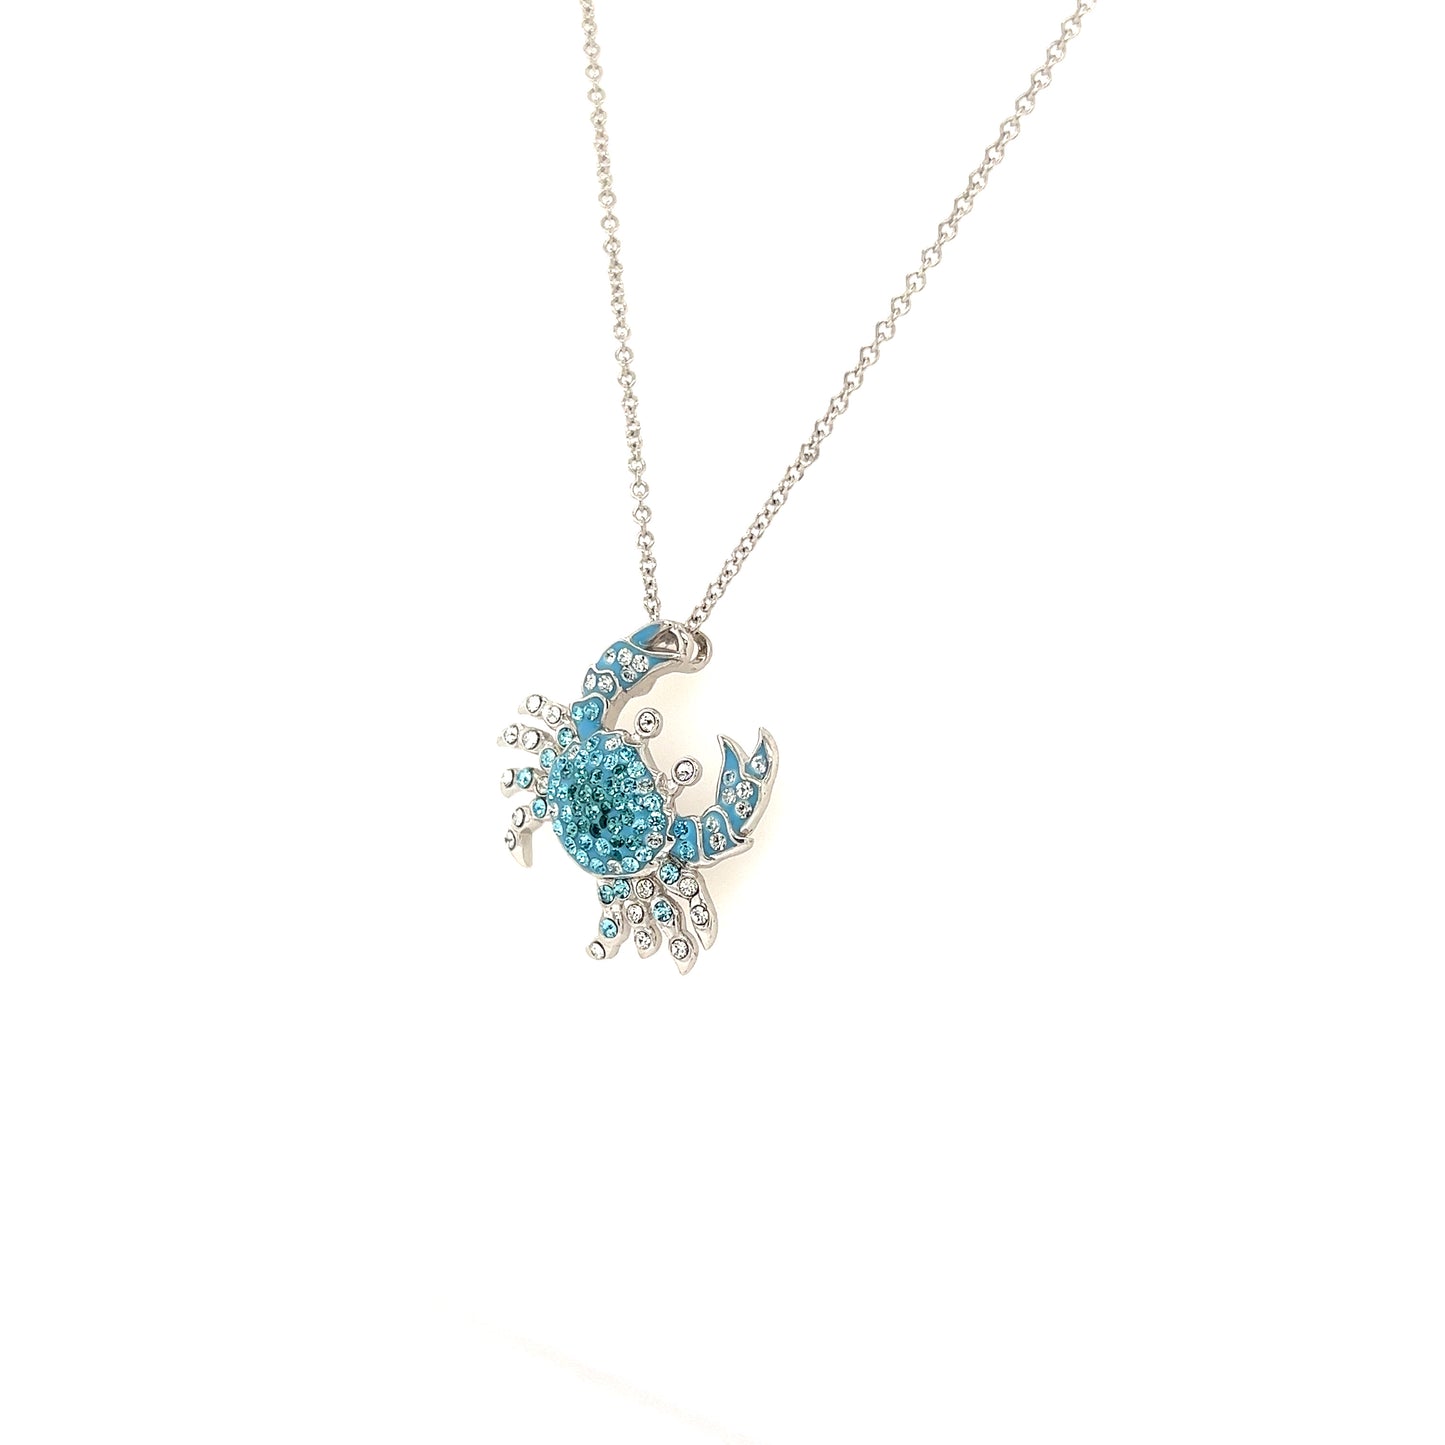 Blue Crab Necklace with Aqua and White Crystals in Sterling Silver Right Side View